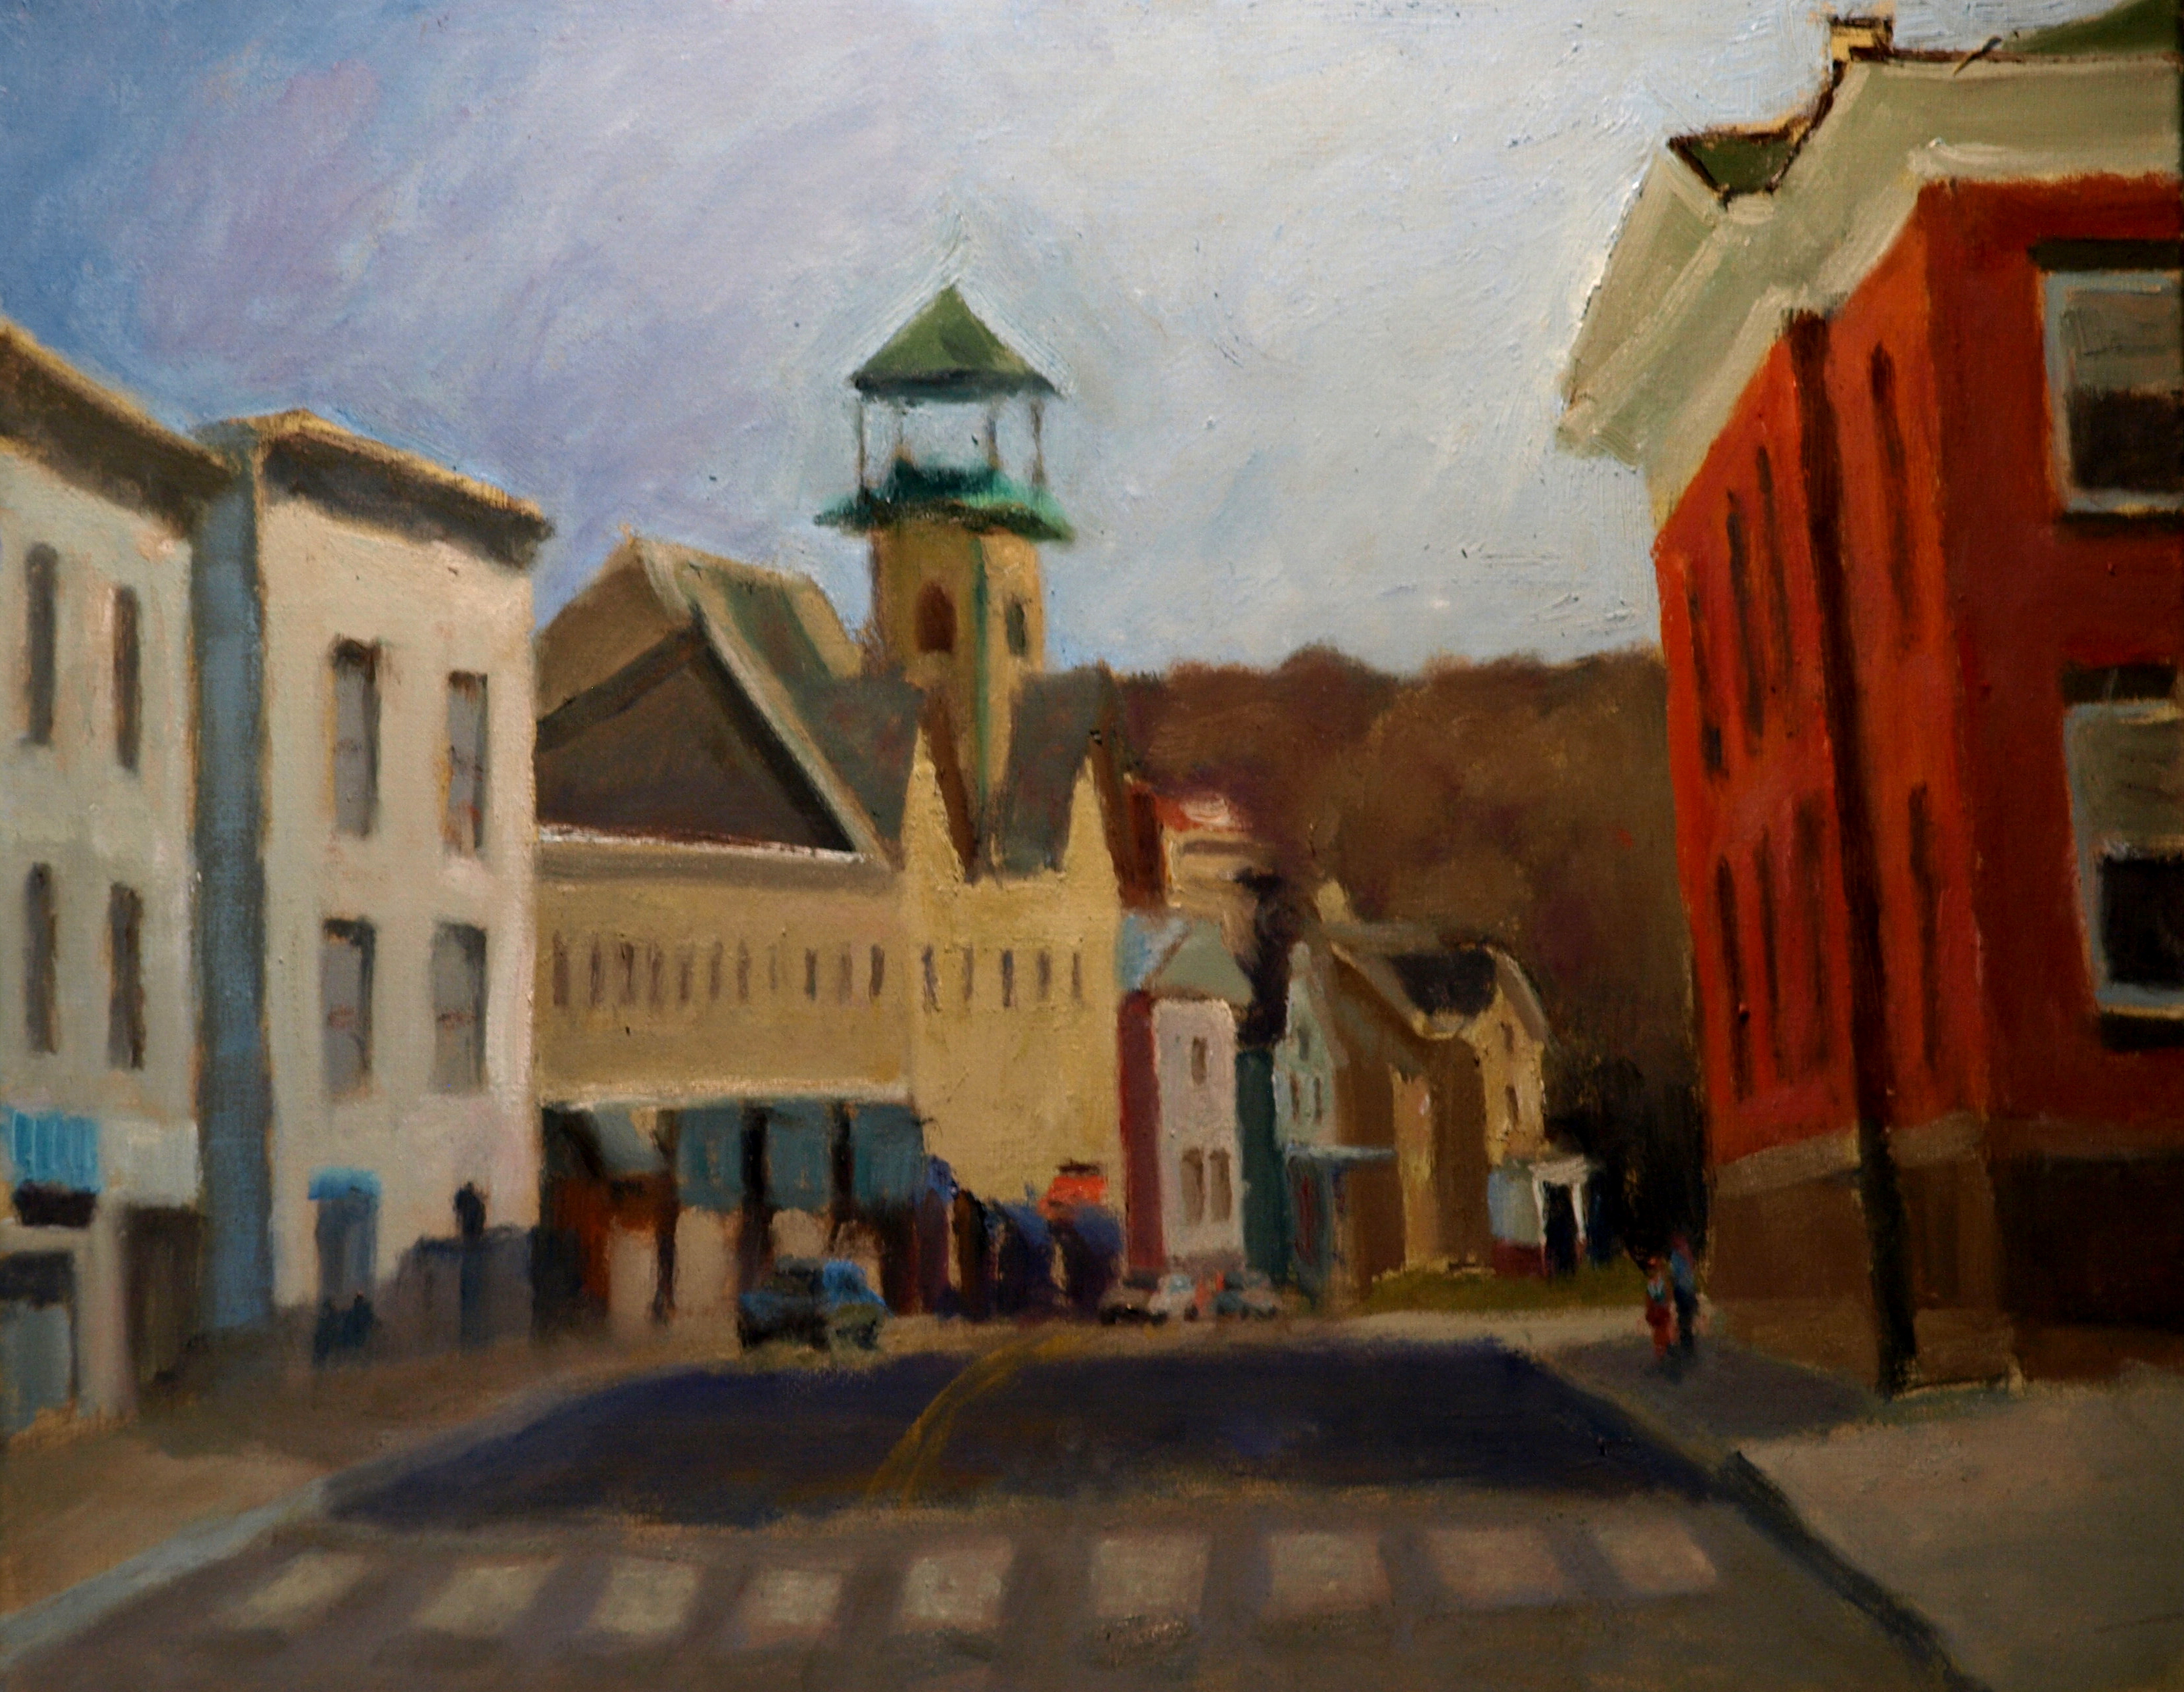 Bank Street, Oil on Canvas, 20 x 24 inches, by Richard Stalter, $650